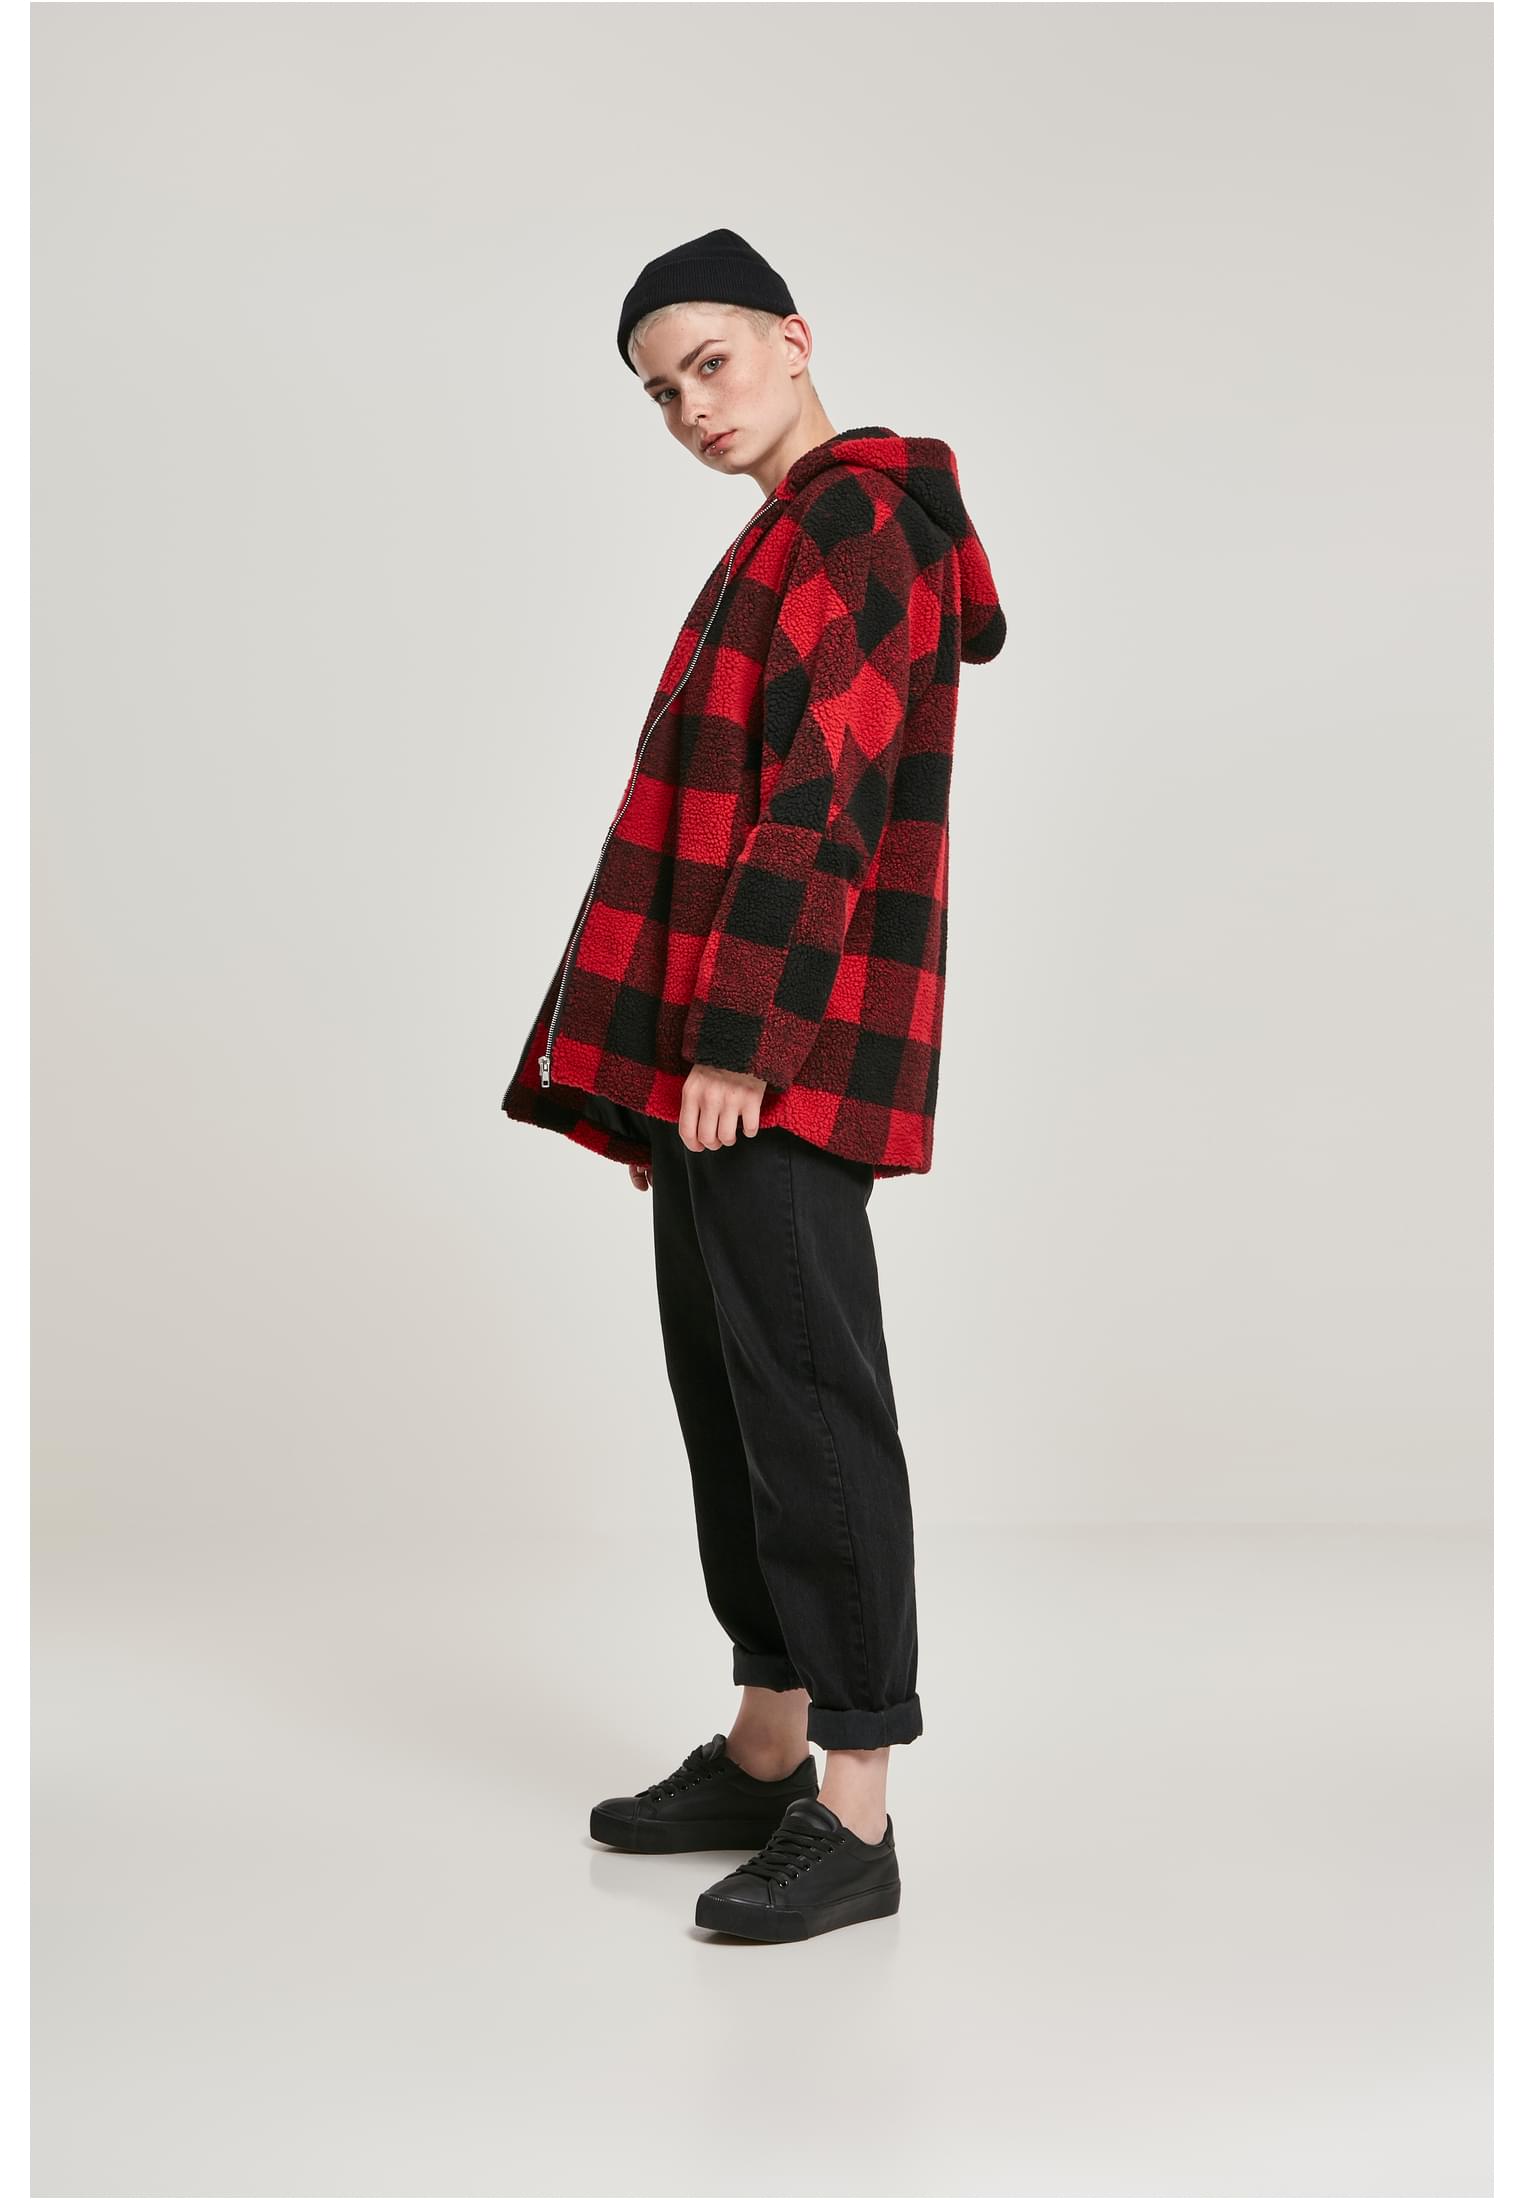 Ladies Hooded Jacket-TB3056 Sherpa Oversized Check